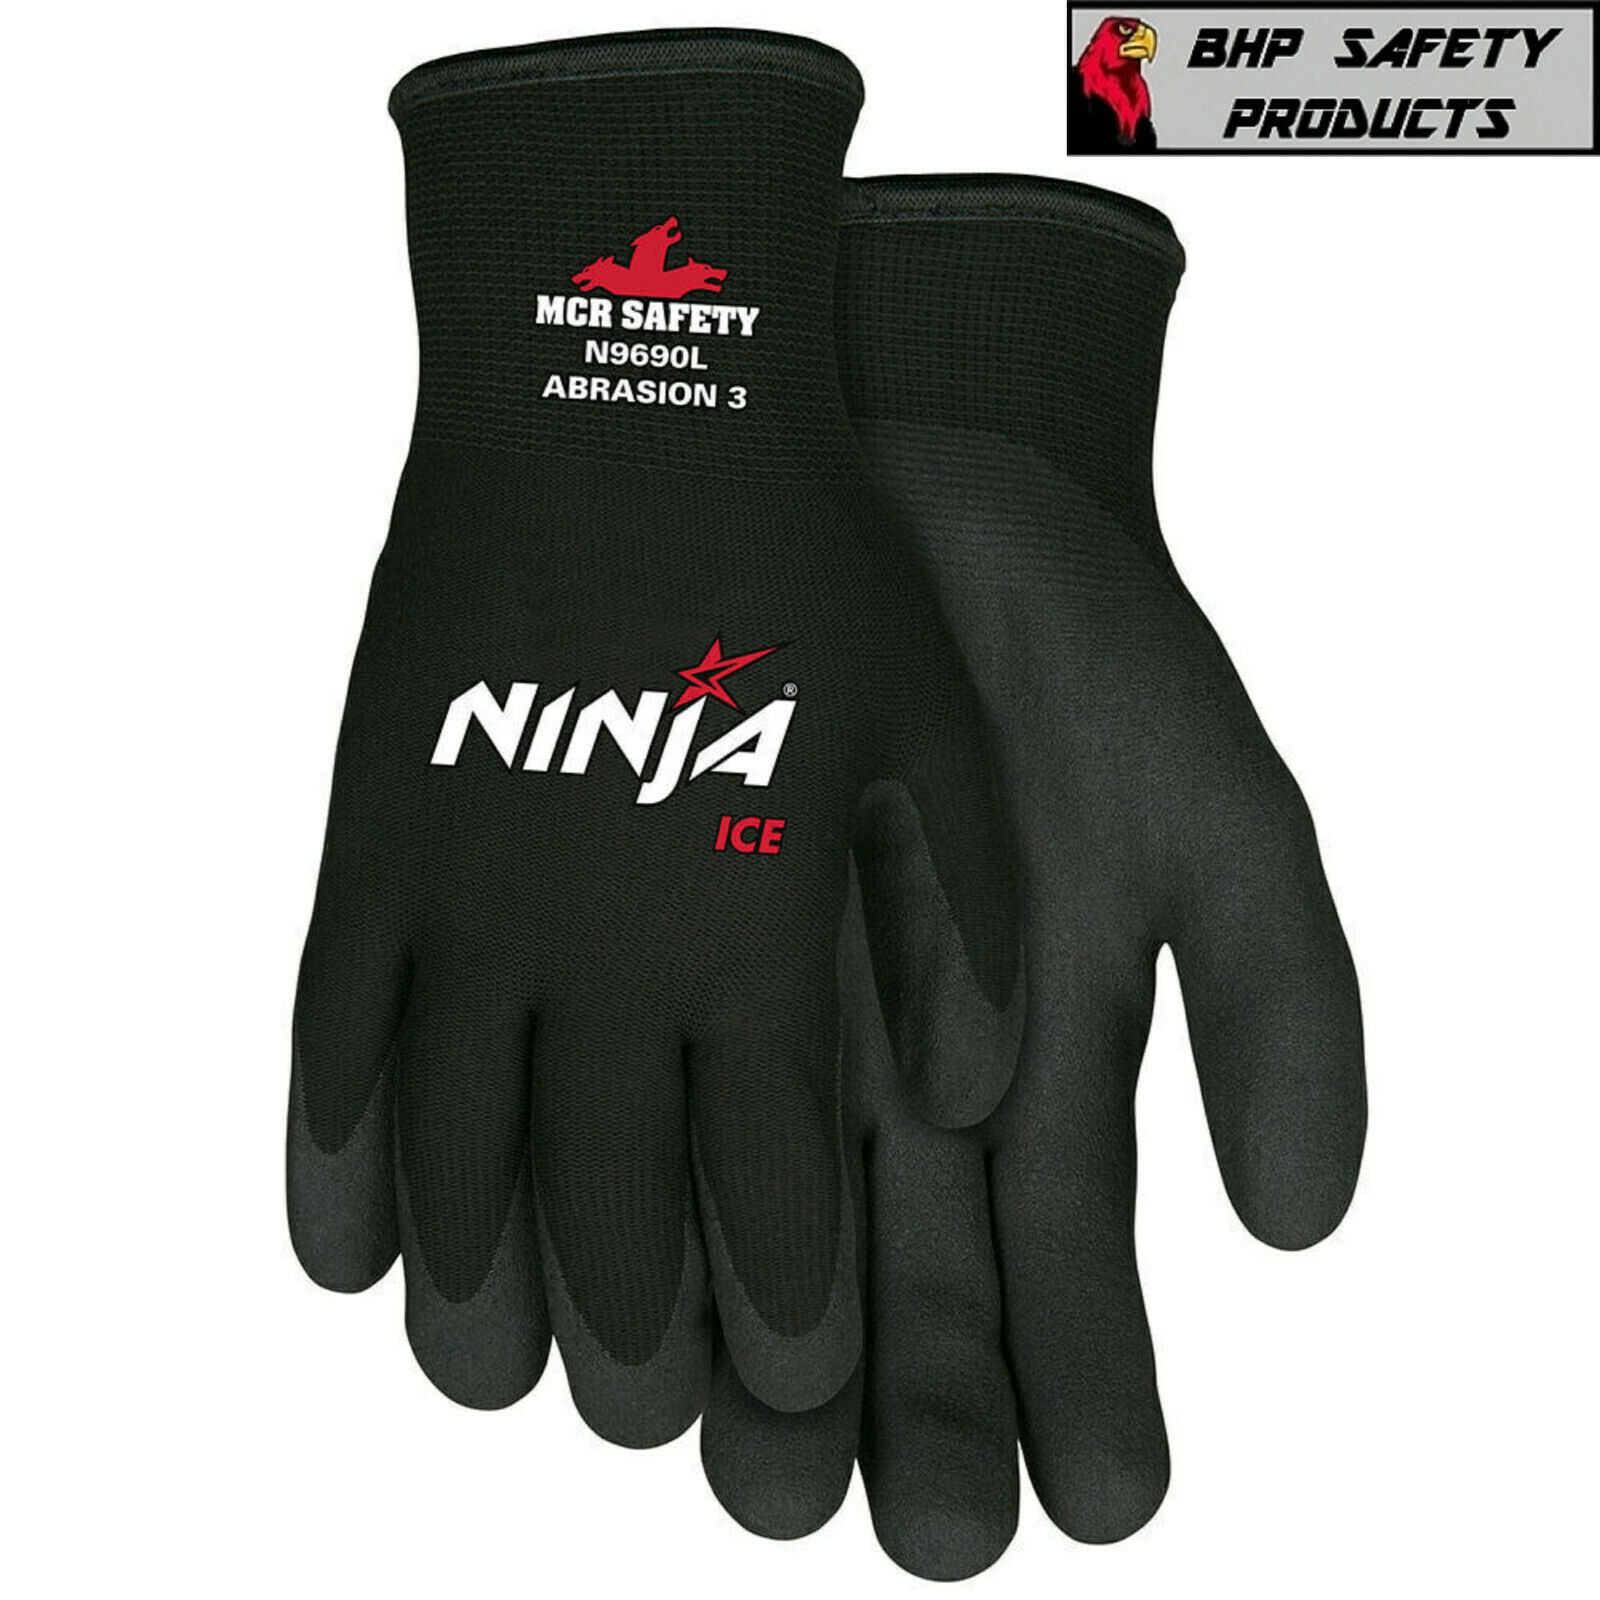 Mcr Memphis Ninja Ice Insulated Cold Winter Weather Safety Work Gloves 1/pair